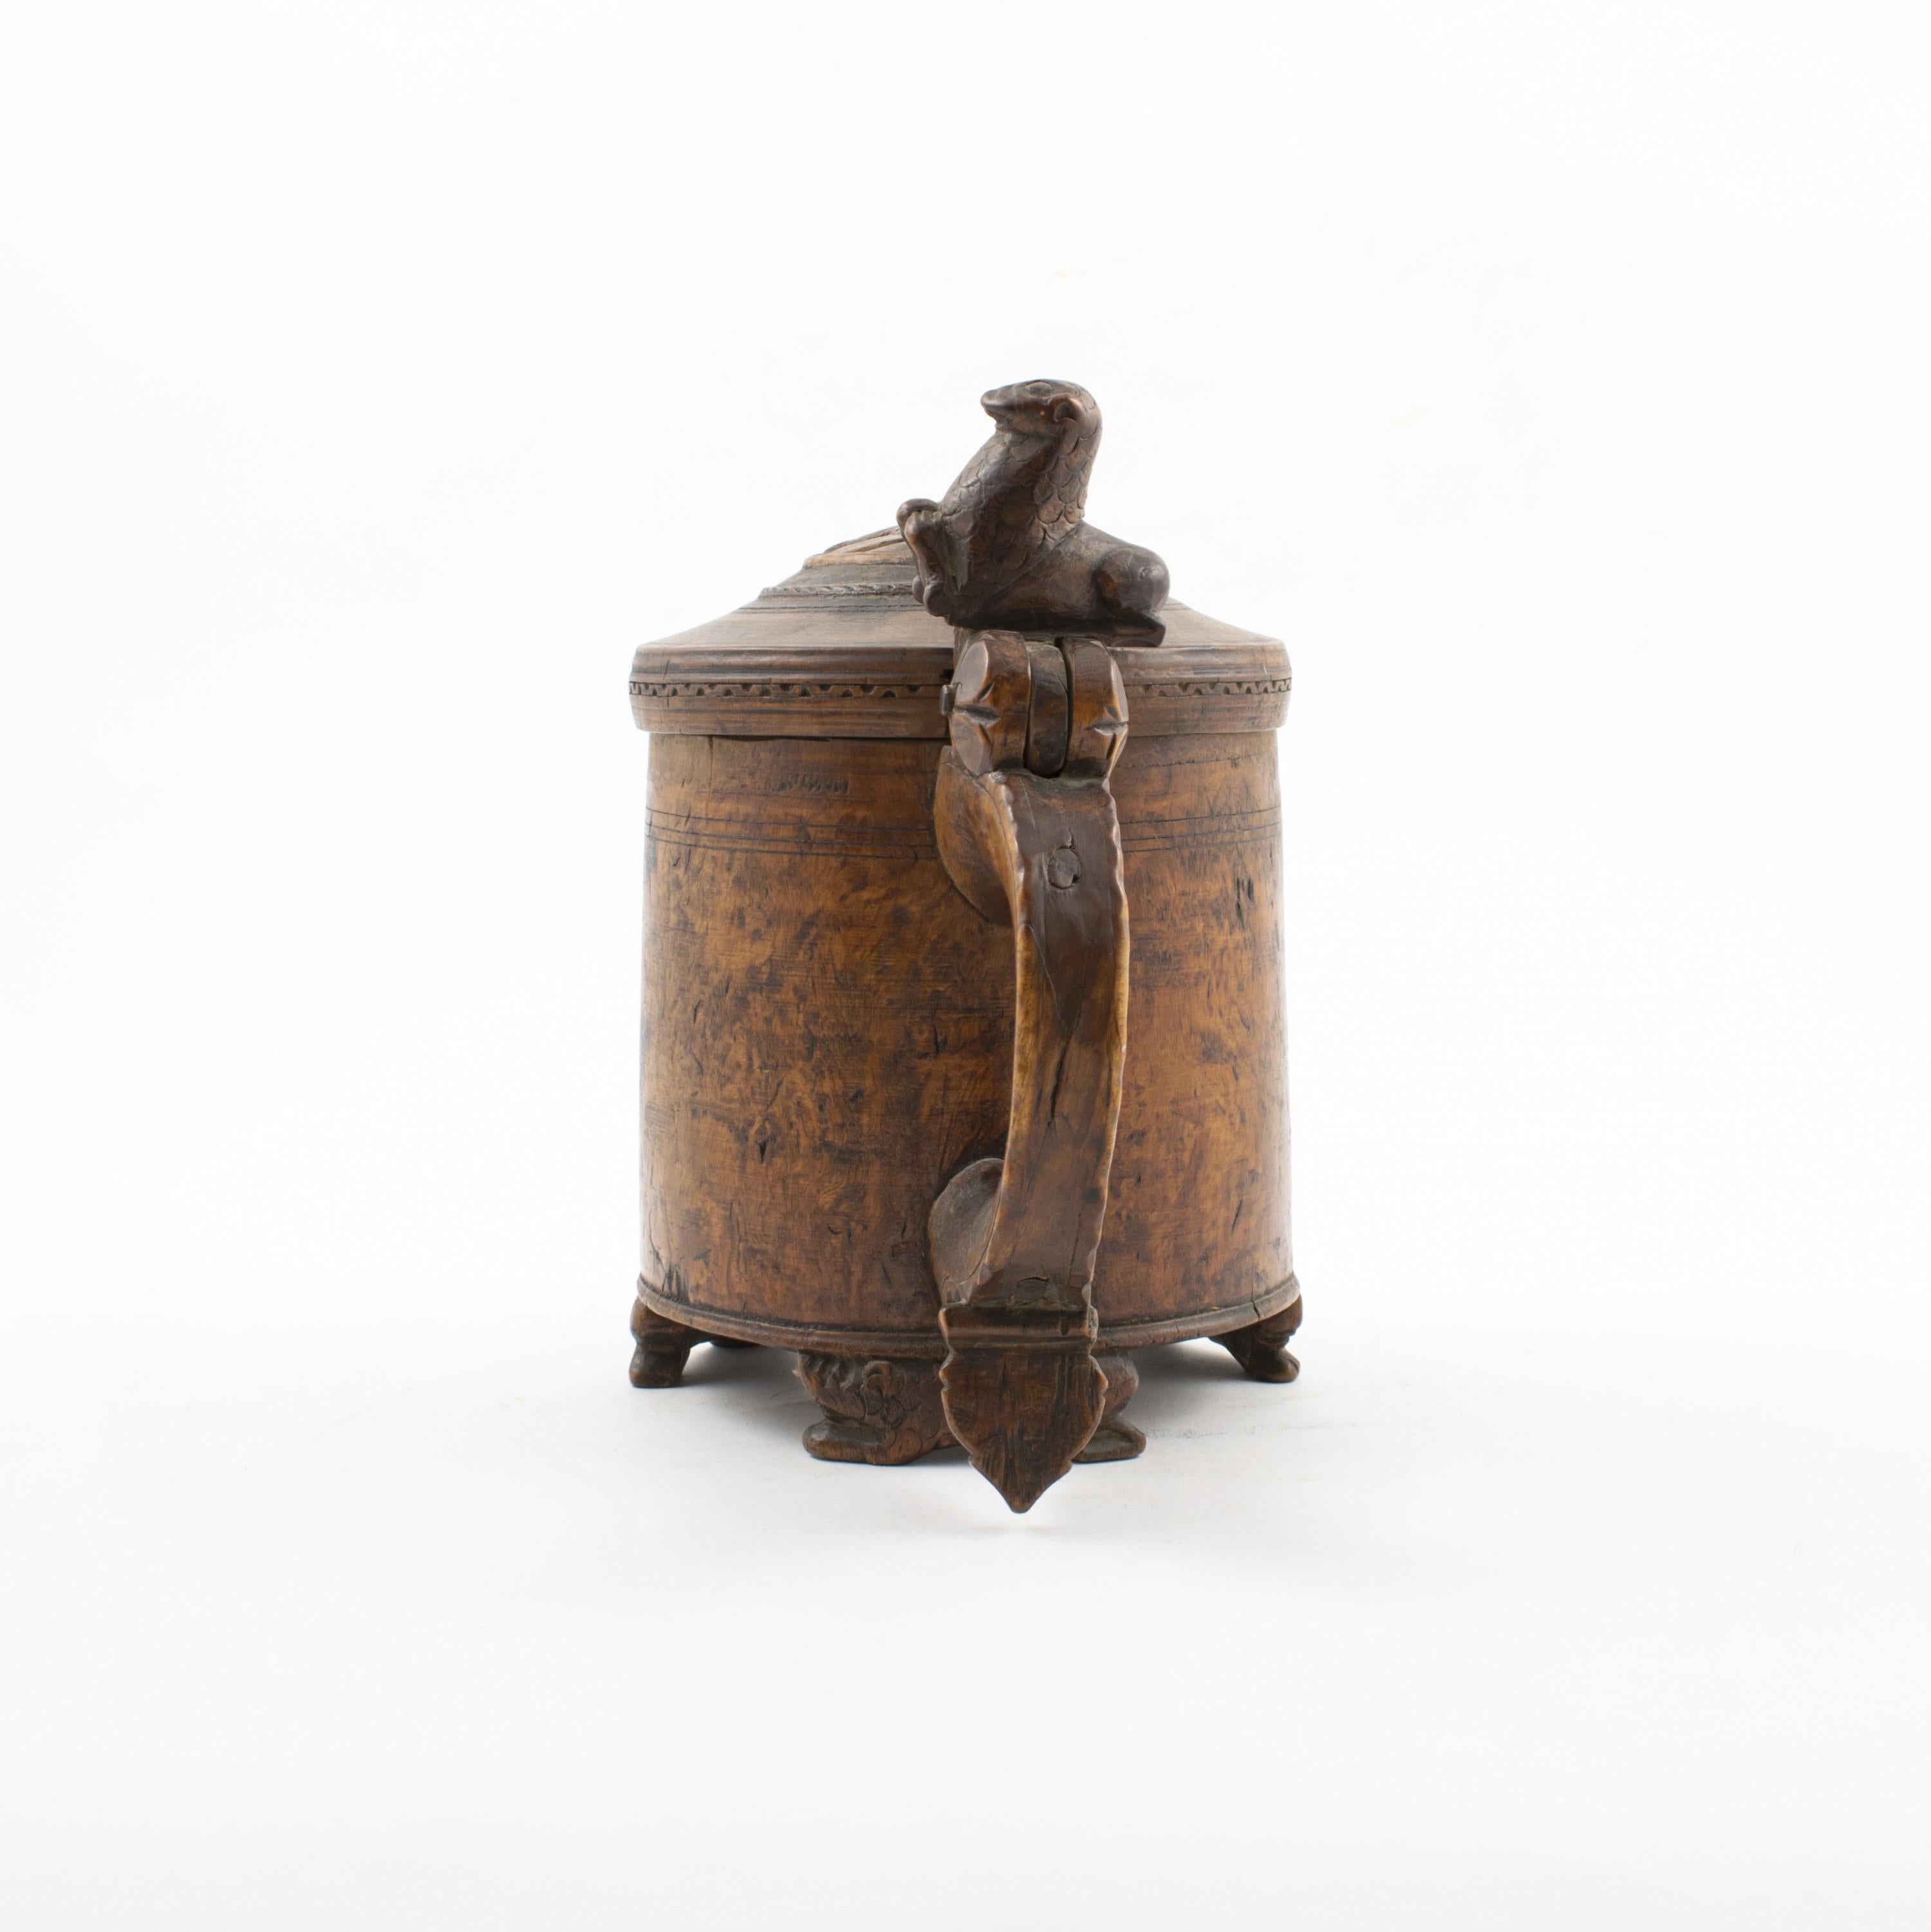 Norwegian peg tankard in birch root with carved lion motif on top of lid, thumb piece and feet.
Original condition with natural patina.
Norway, 1730-1750.

NB: The lion thumb piece is missing a piece of its upper jaw.

Provenance from a Danish